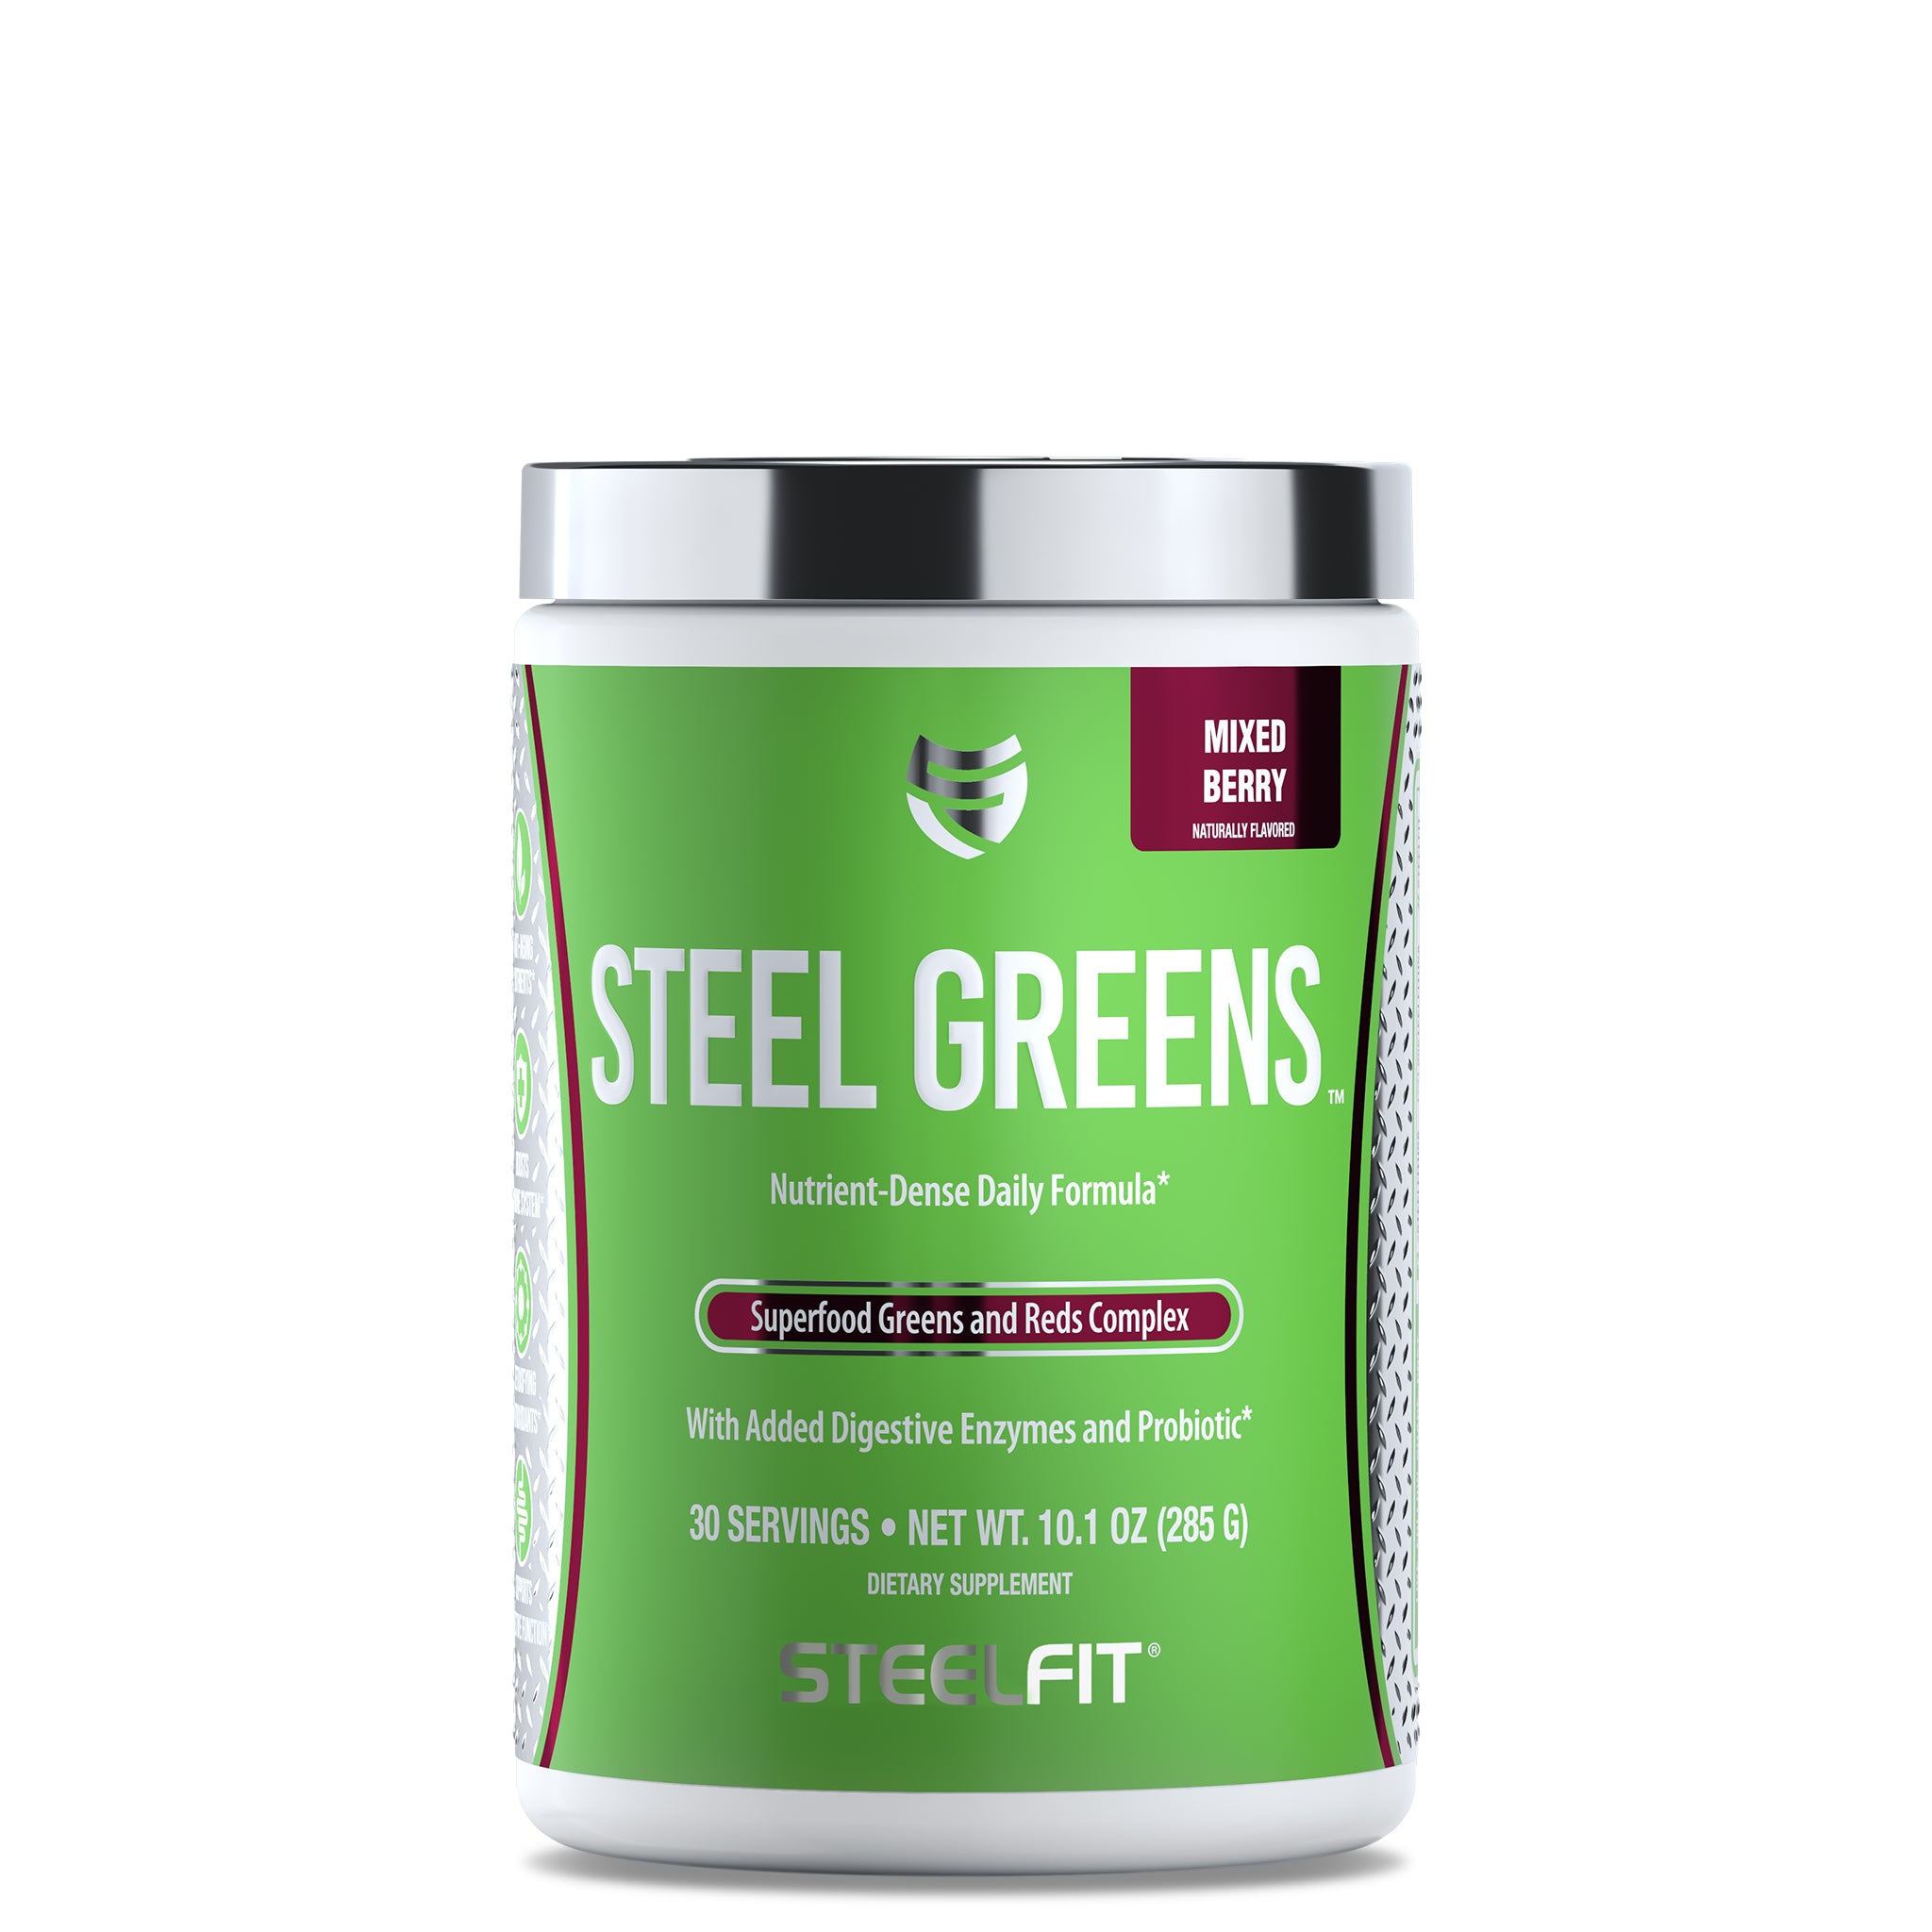 green superfood supplement, green superfood supplements, green superfood powder, mixed berry